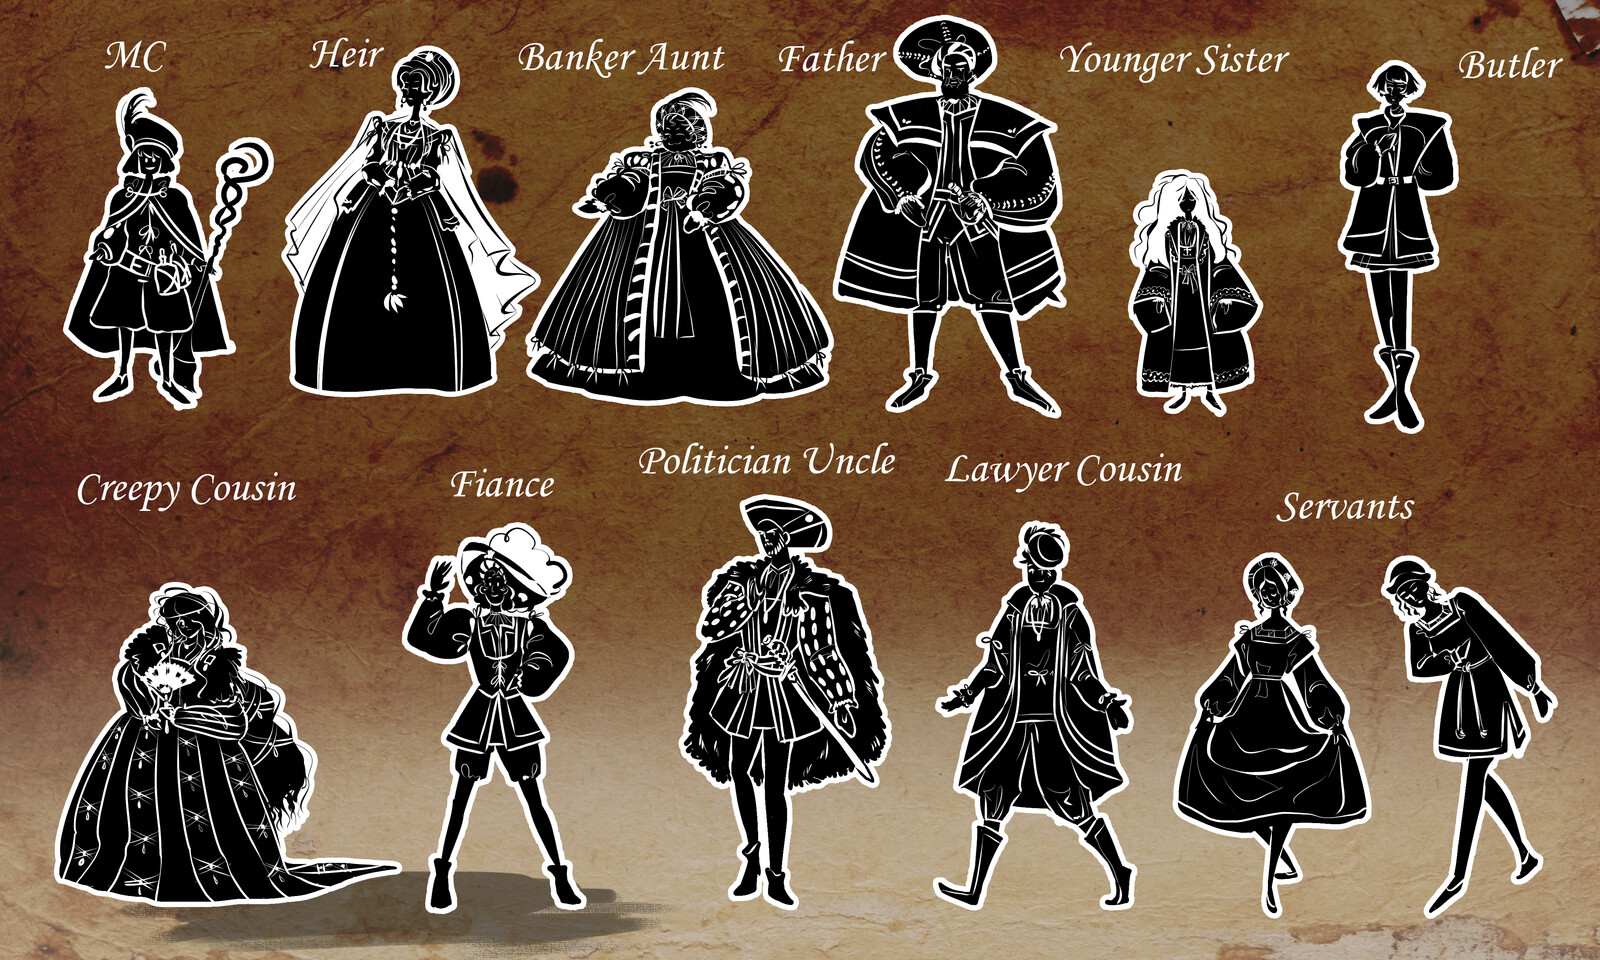 Initial silhouettes showing the line-up of  family members. MC (Piero) was significantly aged up since this initial sketch.